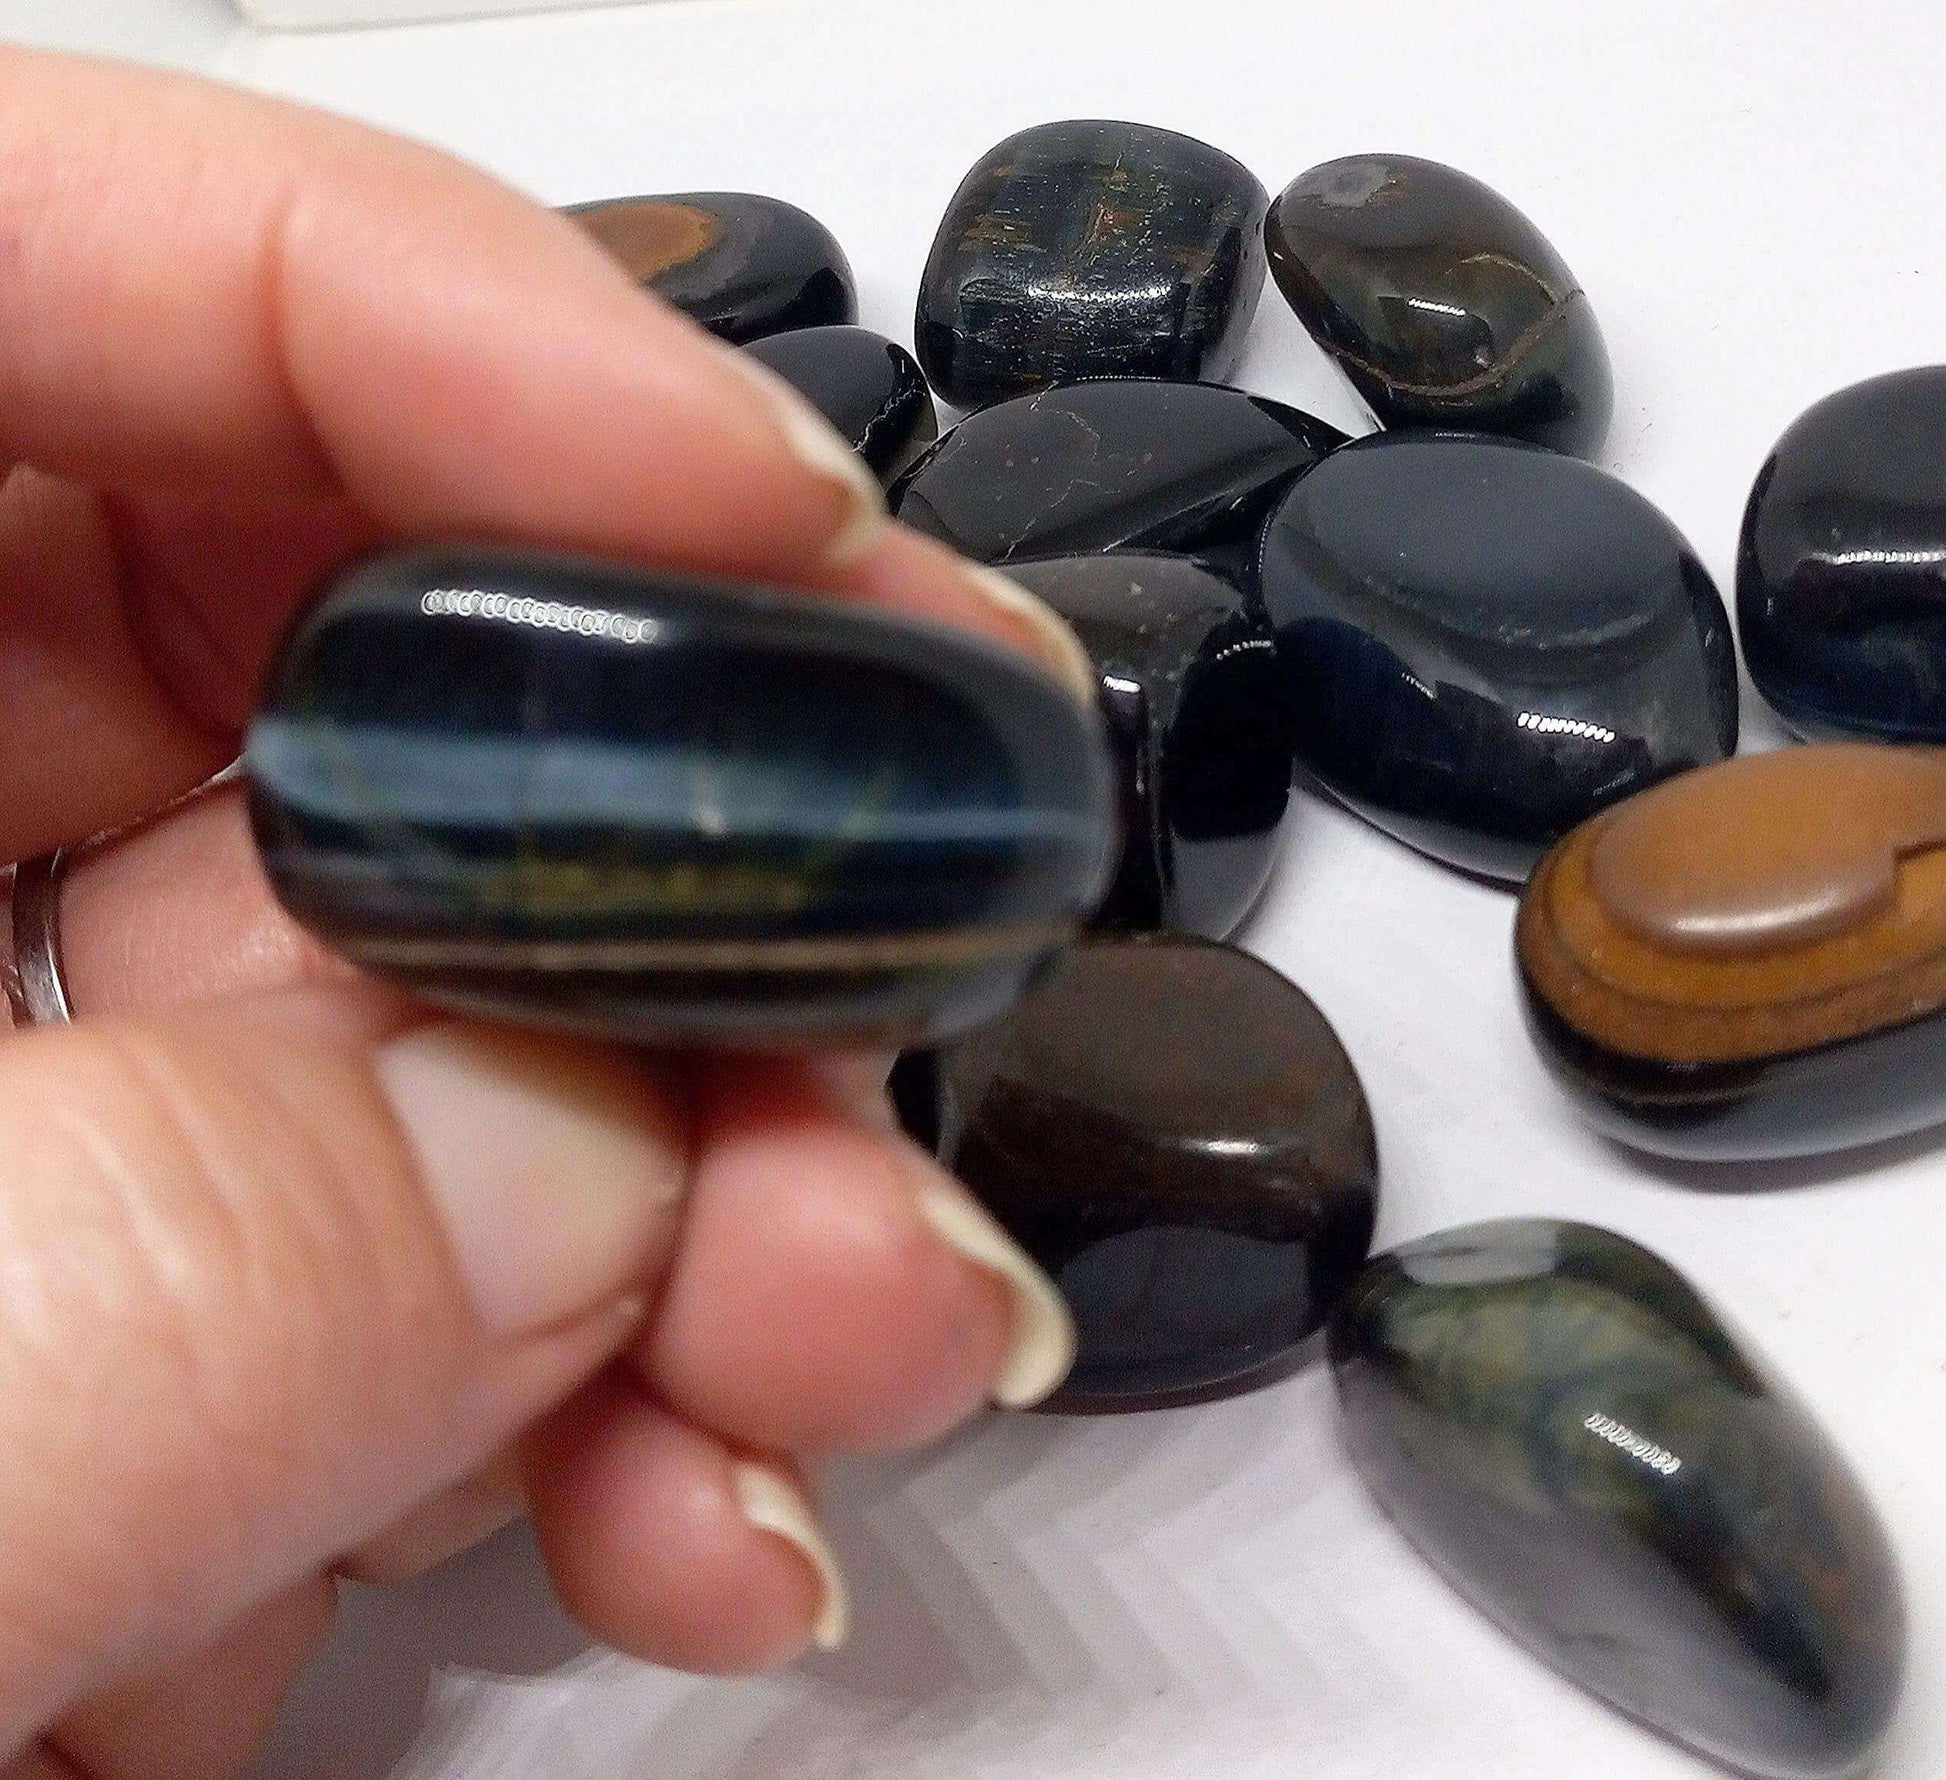 Blue Tiger Eye Tumbled Natural Balance, Confidence - Guiding Lights Boutique